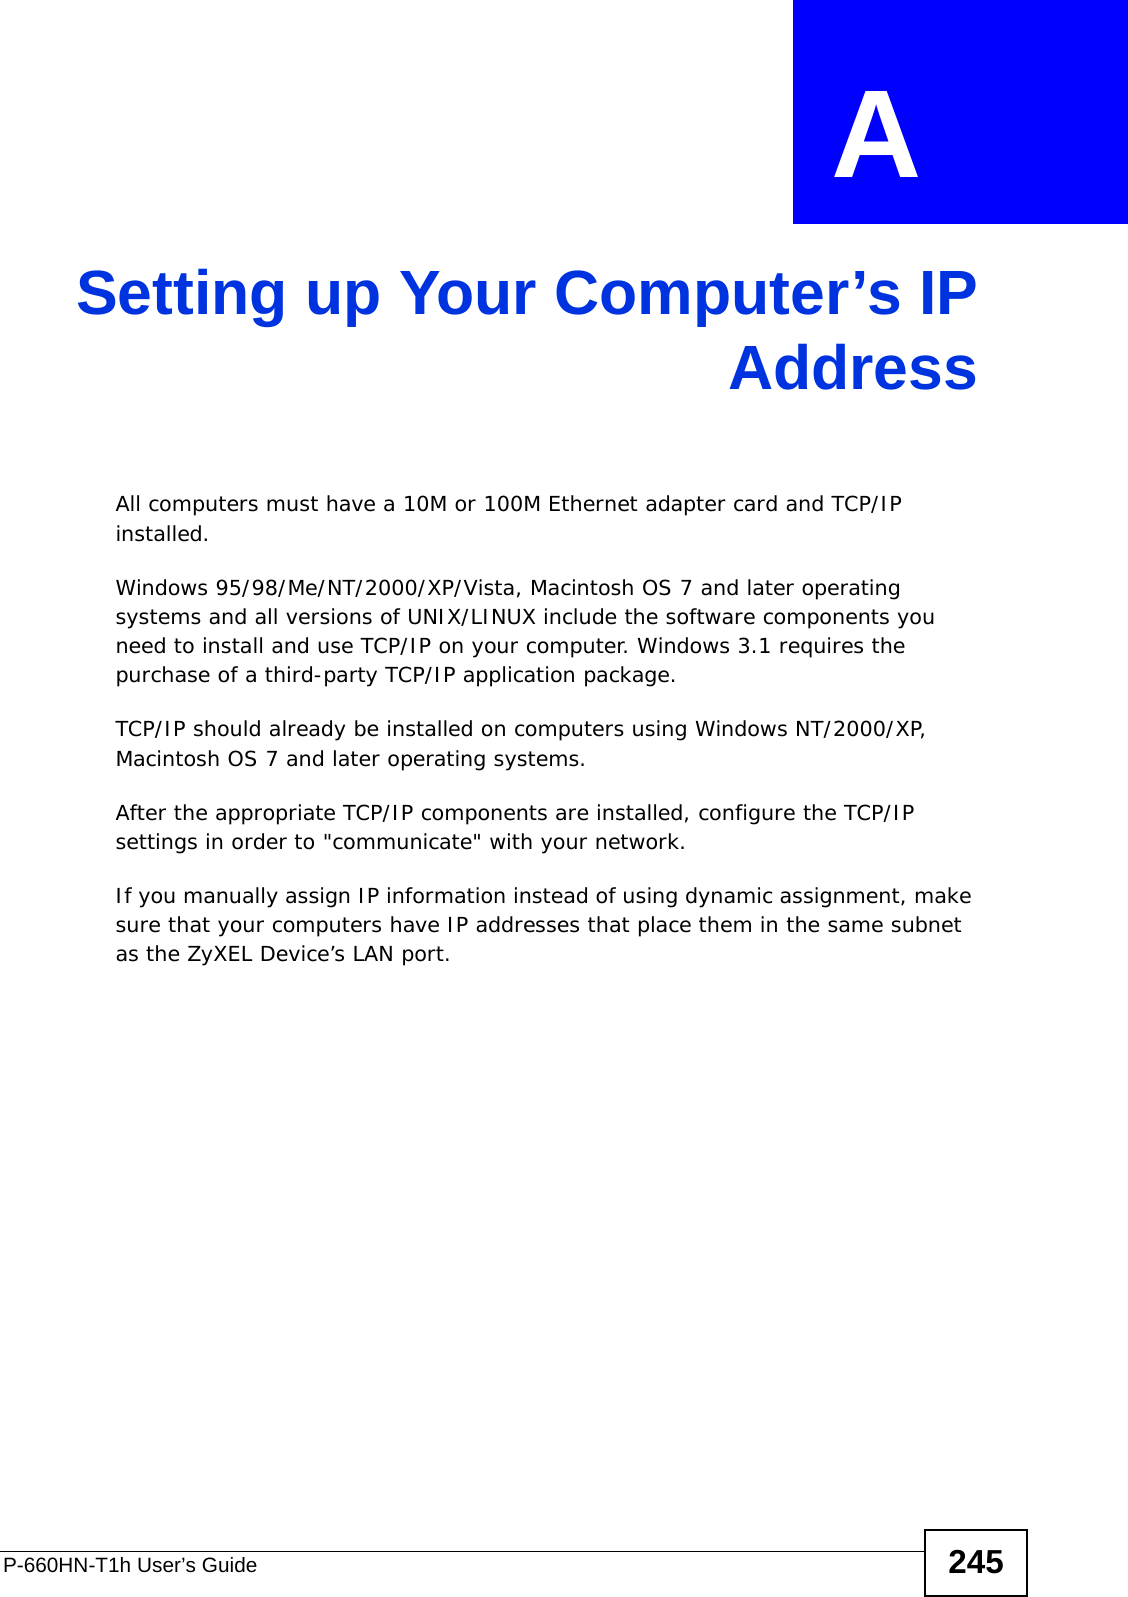 P-660HN-T1h User’s Guide 245APPENDIX  A Setting up Your Computer’s IPAddressAll computers must have a 10M or 100M Ethernet adapter card and TCP/IP installed. Windows 95/98/Me/NT/2000/XP/Vista, Macintosh OS 7 and later operating systems and all versions of UNIX/LINUX include the software components you need to install and use TCP/IP on your computer. Windows 3.1 requires the purchase of a third-party TCP/IP application package.TCP/IP should already be installed on computers using Windows NT/2000/XP, Macintosh OS 7 and later operating systems.After the appropriate TCP/IP components are installed, configure the TCP/IP settings in order to &quot;communicate&quot; with your network. If you manually assign IP information instead of using dynamic assignment, make sure that your computers have IP addresses that place them in the same subnet as the ZyXEL Device’s LAN port.